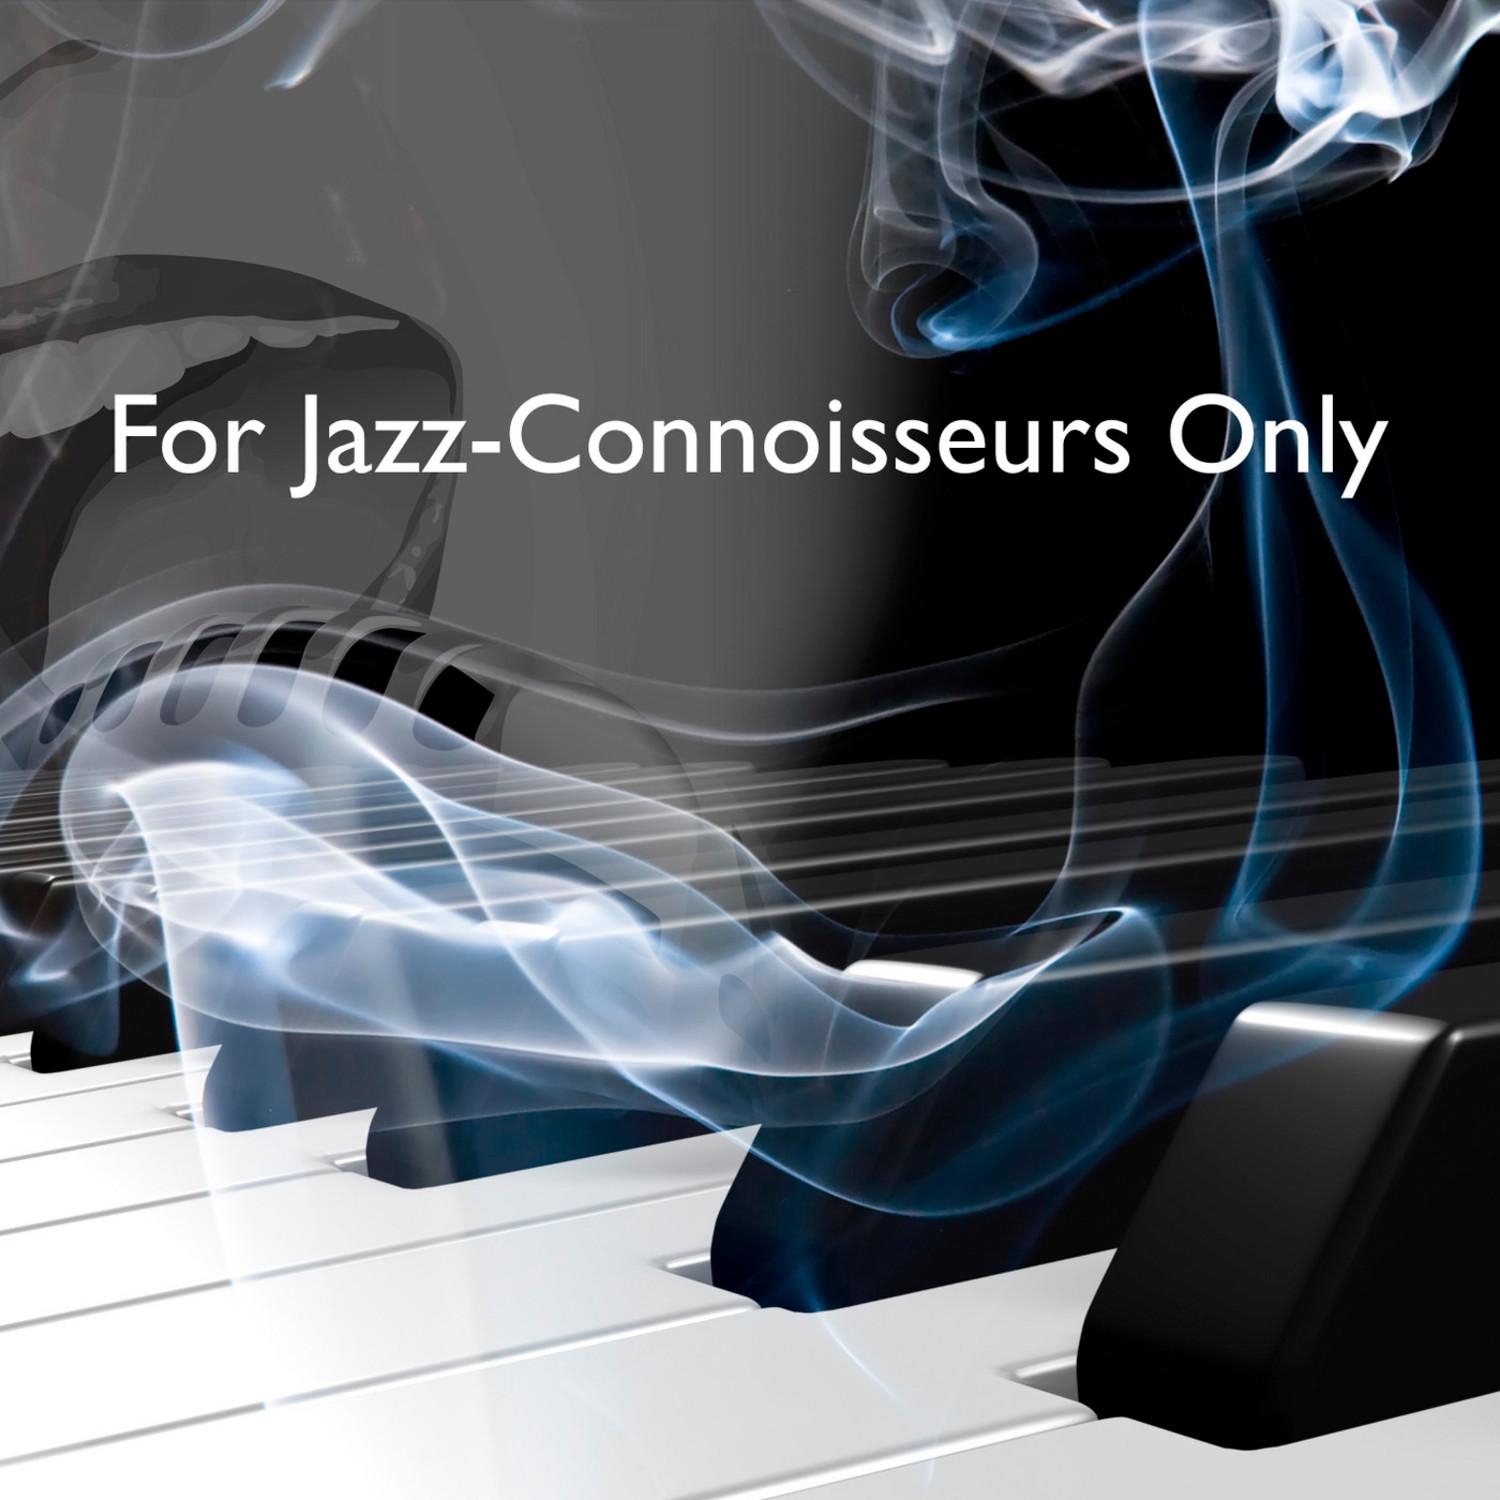 For Jazz-Connoisseurs Only